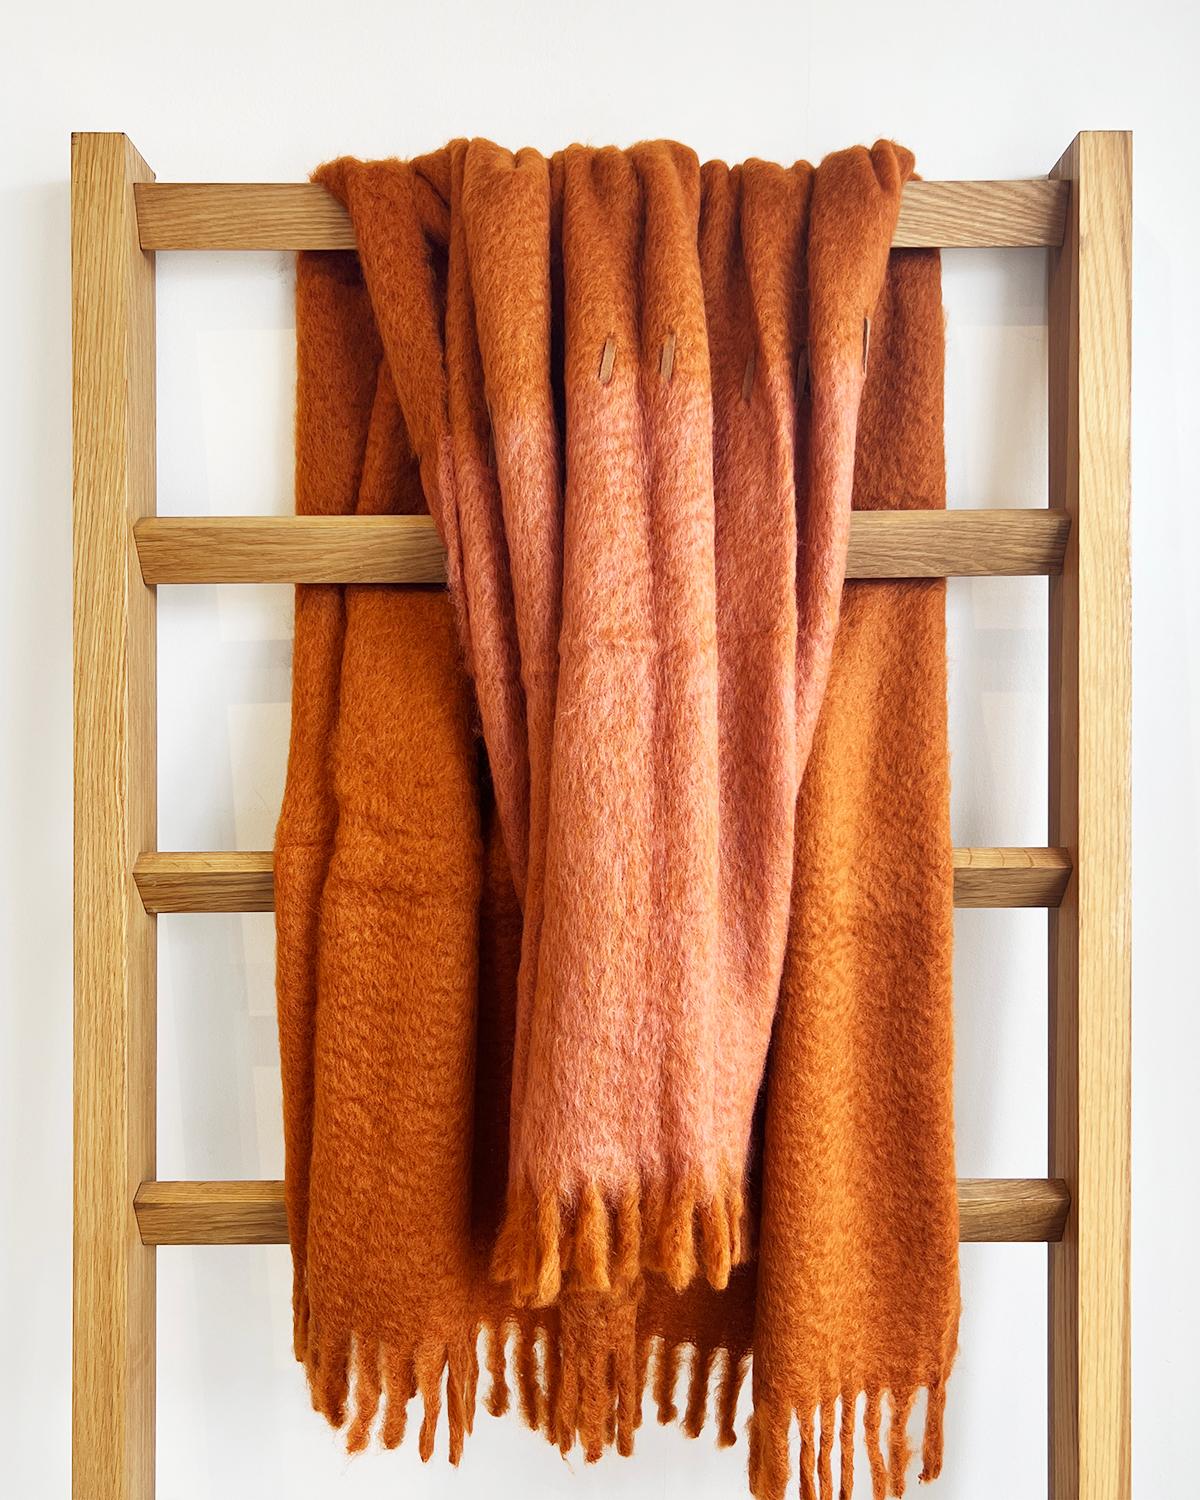 Spanish Mantas Ezcaray Terracotta & Brick Red Mohair Blanket Throw w/ Suede Whipstitch For Sale